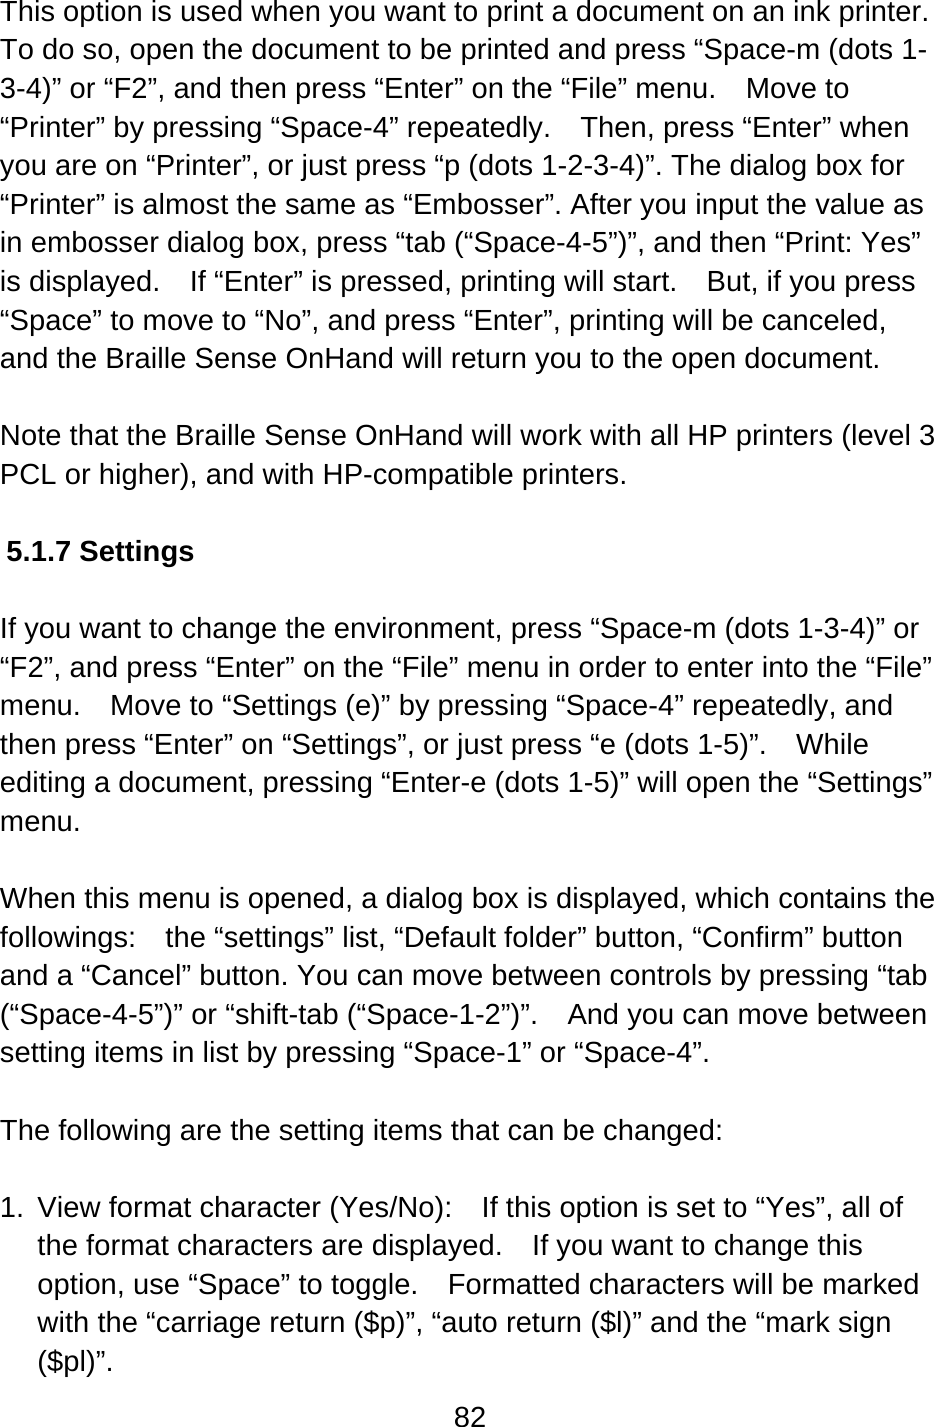 82  This option is used when you want to print a document on an ink printer.   To do so, open the document to be printed and press “Space-m (dots 1-3-4)” or “F2”, and then press “Enter” on the “File” menu.    Move to “Printer” by pressing “Space-4” repeatedly.    Then, press “Enter” when you are on “Printer”, or just press “p (dots 1-2-3-4)”. The dialog box for “Printer” is almost the same as “Embosser”. After you input the value as in embosser dialog box, press “tab (“Space-4-5”)”, and then “Print: Yes” is displayed.    If “Enter” is pressed, printing will start.    But, if you press “Space” to move to “No”, and press “Enter”, printing will be canceled, and the Braille Sense OnHand will return you to the open document.  Note that the Braille Sense OnHand will work with all HP printers (level 3 PCL or higher), and with HP-compatible printers.  5.1.7 Settings  If you want to change the environment, press “Space-m (dots 1-3-4)” or “F2”, and press “Enter” on the “File” menu in order to enter into the “File” menu.    Move to “Settings (e)” by pressing “Space-4” repeatedly, and then press “Enter” on “Settings”, or just press “e (dots 1-5)”.    While editing a document, pressing “Enter-e (dots 1-5)” will open the “Settings” menu.  When this menu is opened, a dialog box is displayed, which contains the followings:    the “settings” list, “Default folder” button, “Confirm” button and a “Cancel” button. You can move between controls by pressing “tab (“Space-4-5”)” or “shift-tab (“Space-1-2”)”.    And you can move between setting items in list by pressing “Space-1” or “Space-4”.  The following are the setting items that can be changed:  1.  View format character (Yes/No):    If this option is set to “Yes”, all of the format characters are displayed.    If you want to change this option, use “Space” to toggle.    Formatted characters will be marked with the “carriage return ($p)”, “auto return ($l)” and the “mark sign ($pl)”. 